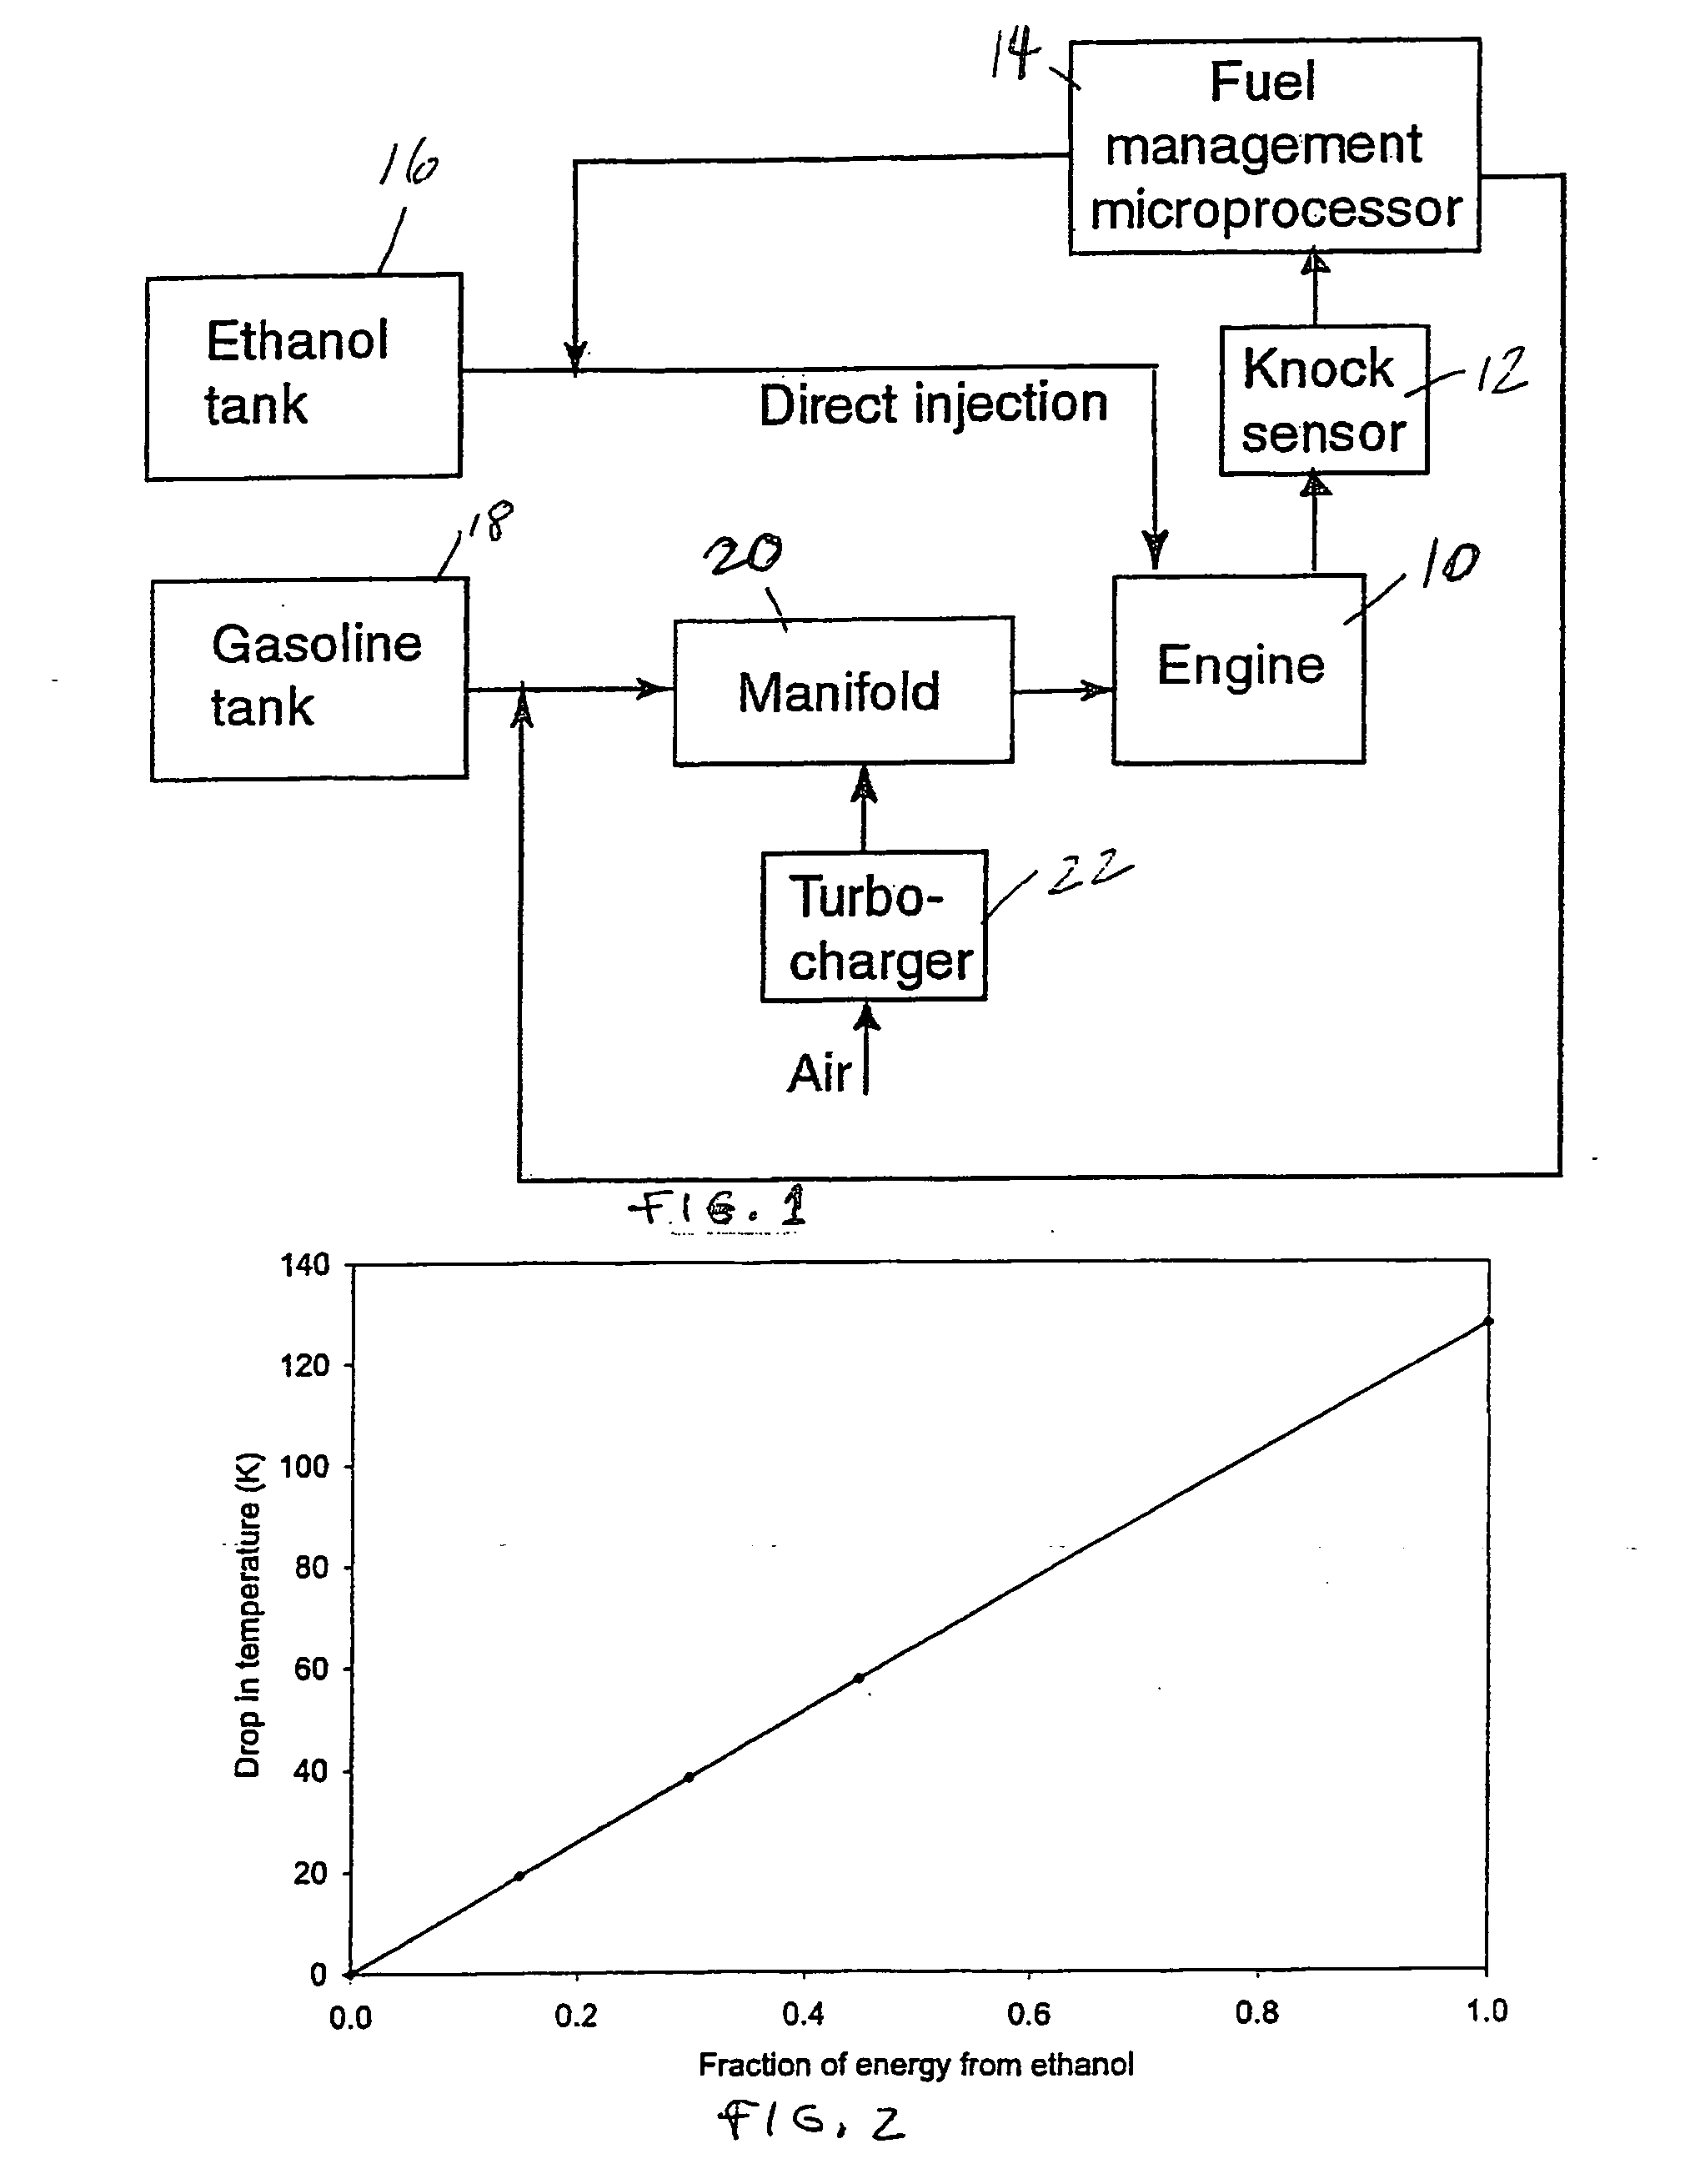 Fuel management system for variable anti-knock agent octane enhancement of gasoline engines